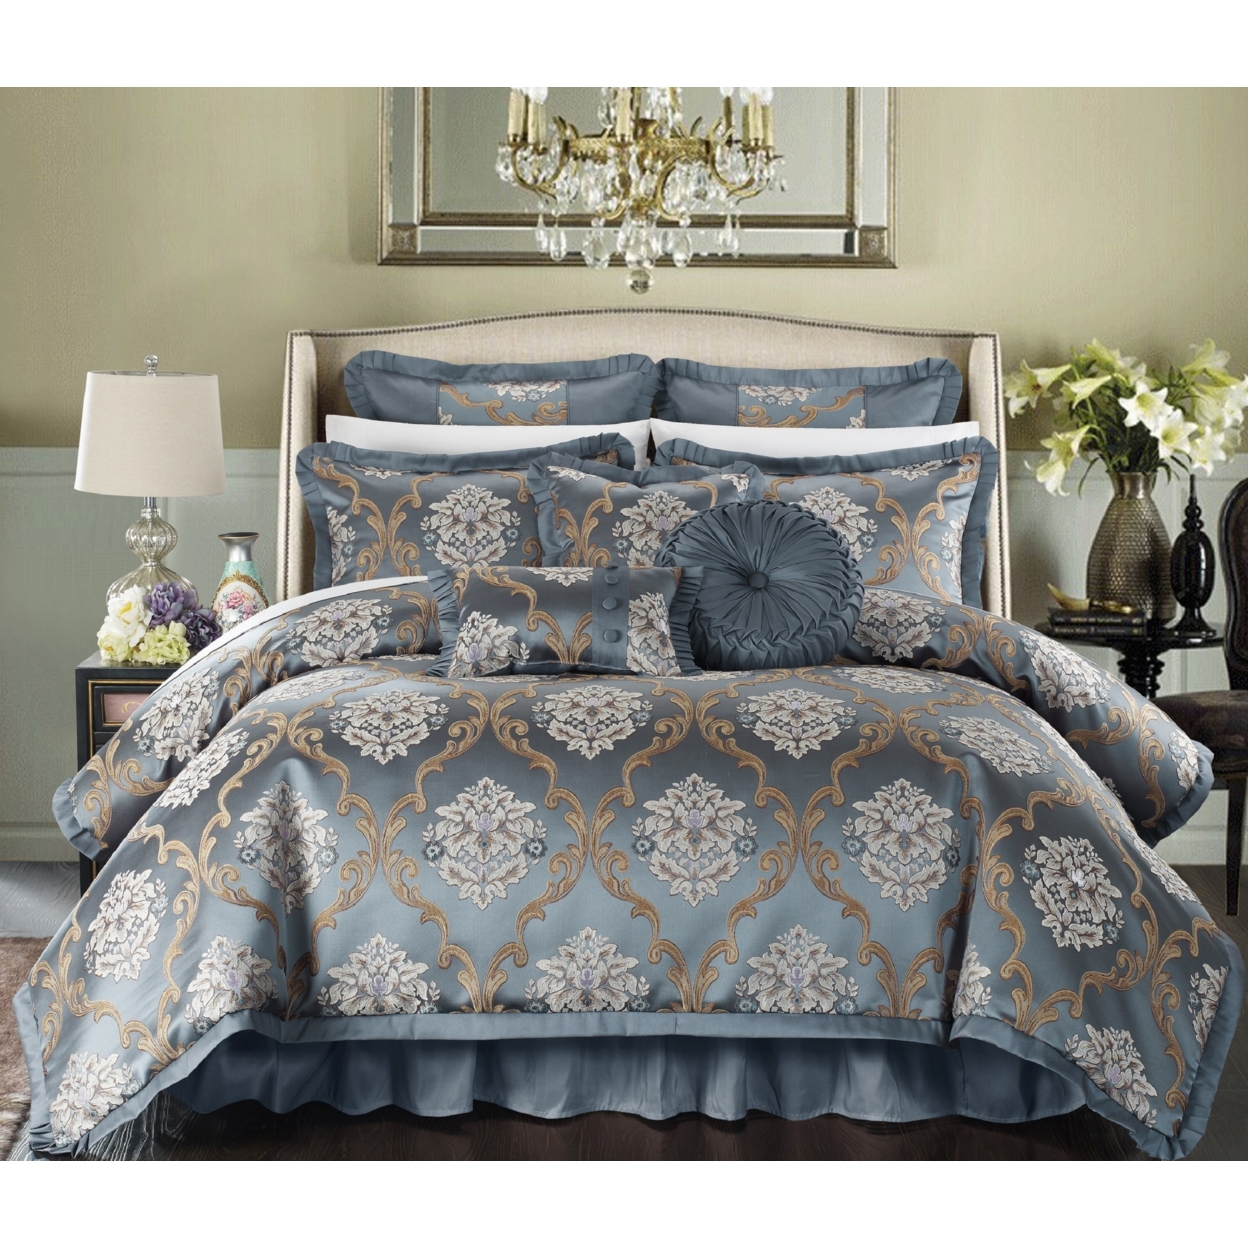 9 Piece Aubrey Decorator Upholstery Quality Jacquard Scroll Fabric Complete Master Bedroom Comforter Set And Pillows Ensemble - Blue, King